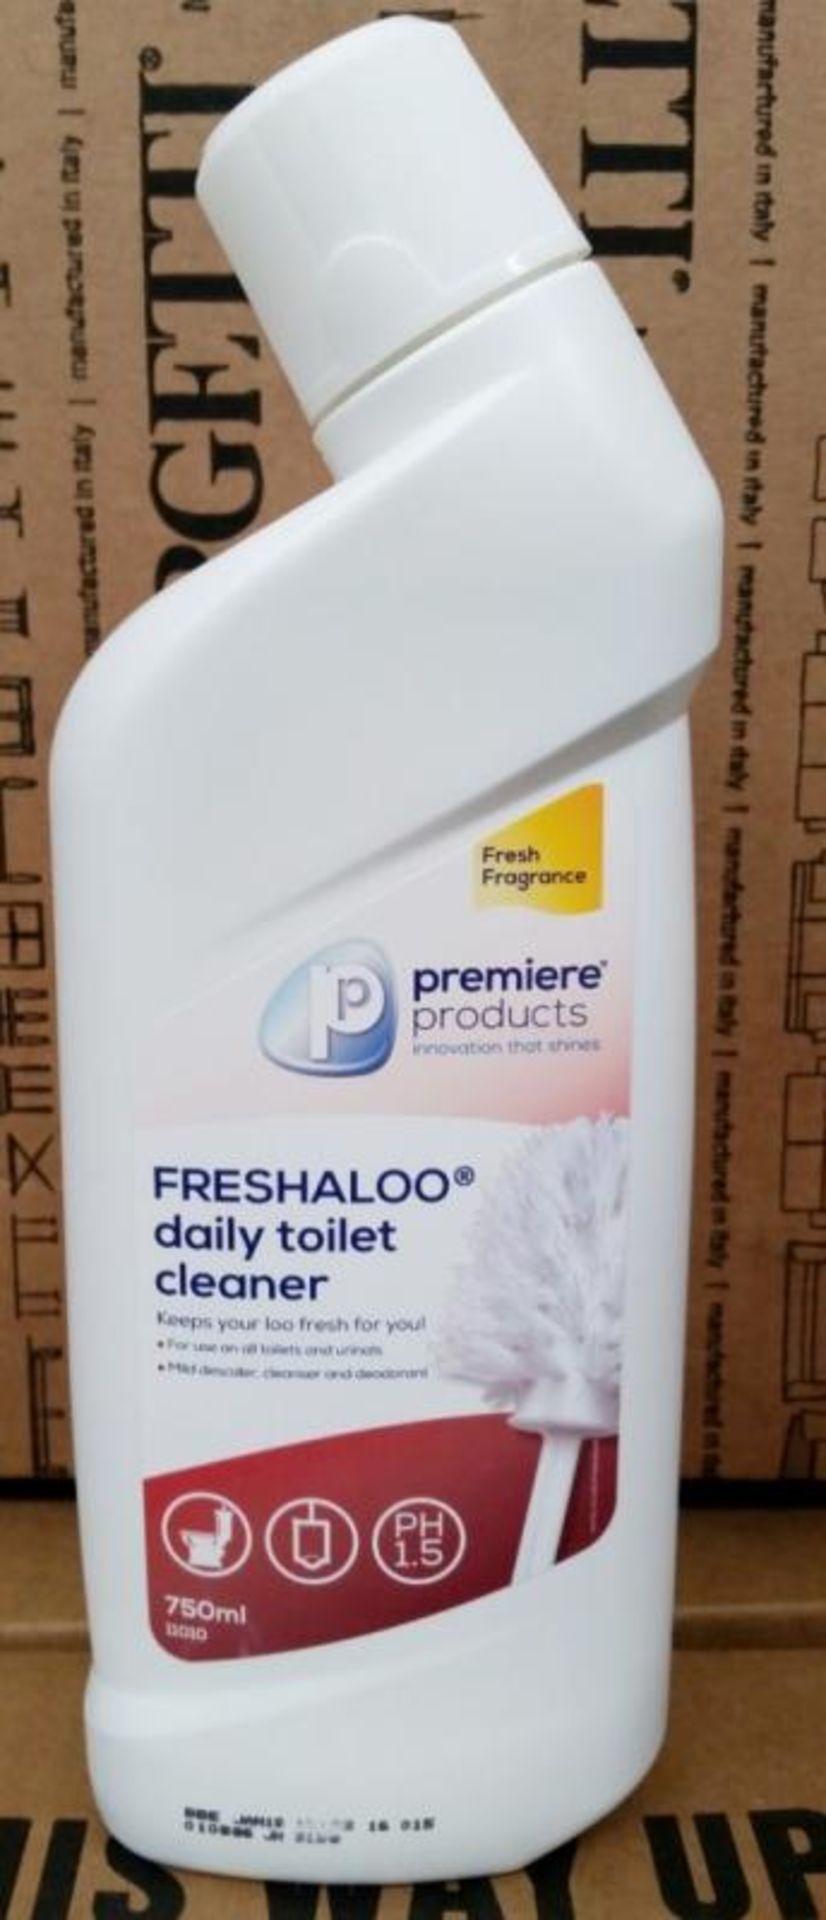 12 x Premiere Products 750ml Freshaloo Daily Toilet Cleaner - Keeps Your Loo Fresh For You - Mild